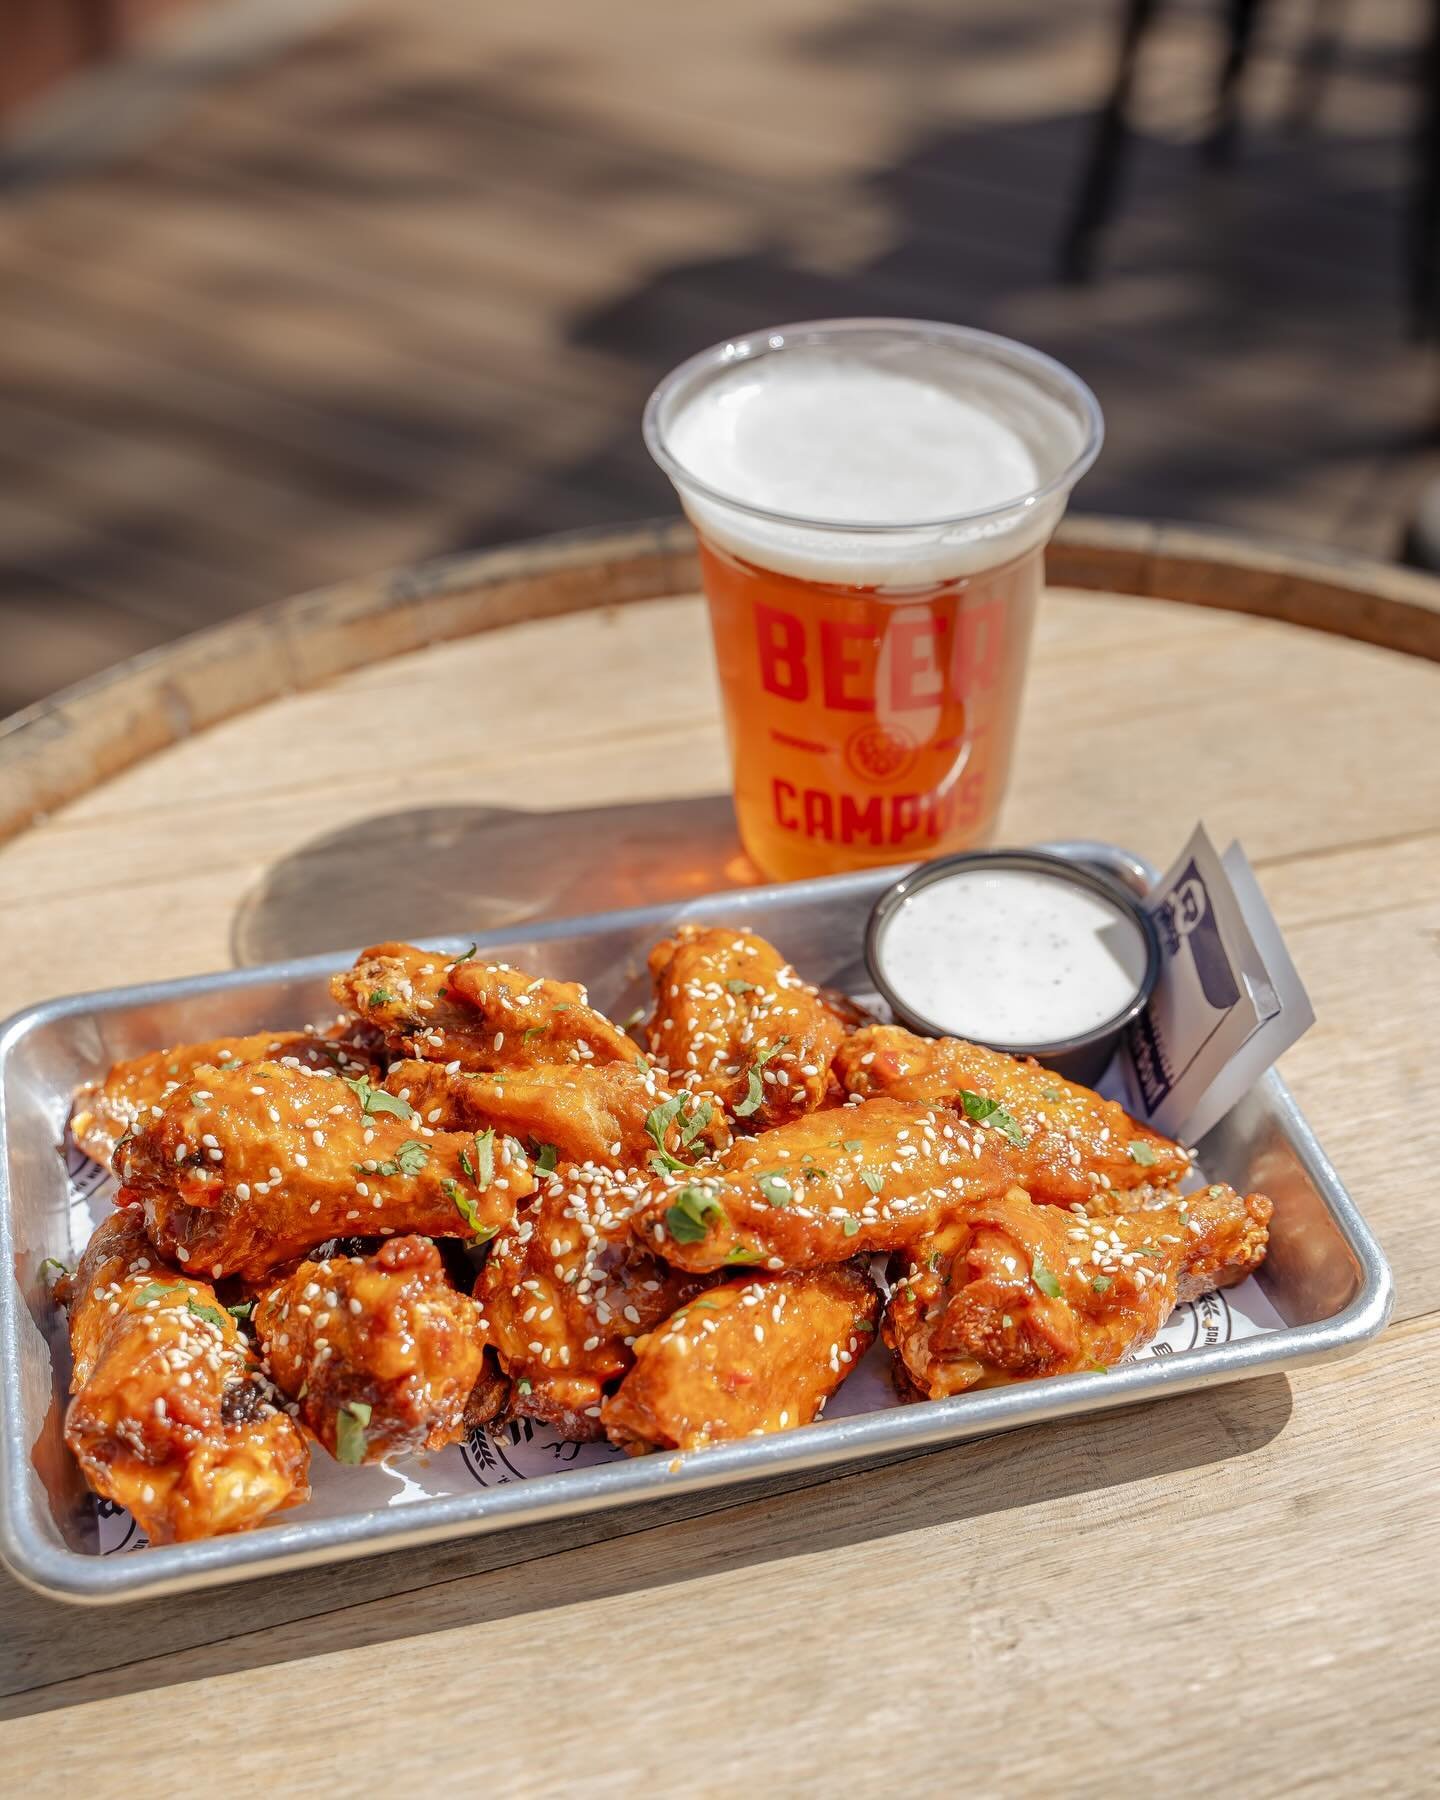 🔥 No-Li Bang Bang Sweet Chili Wings🔥

Perfectly paired with a pint on the Riverside Patio / Bier Garden! Swing by for a bite with our full menu now available on the Patio!